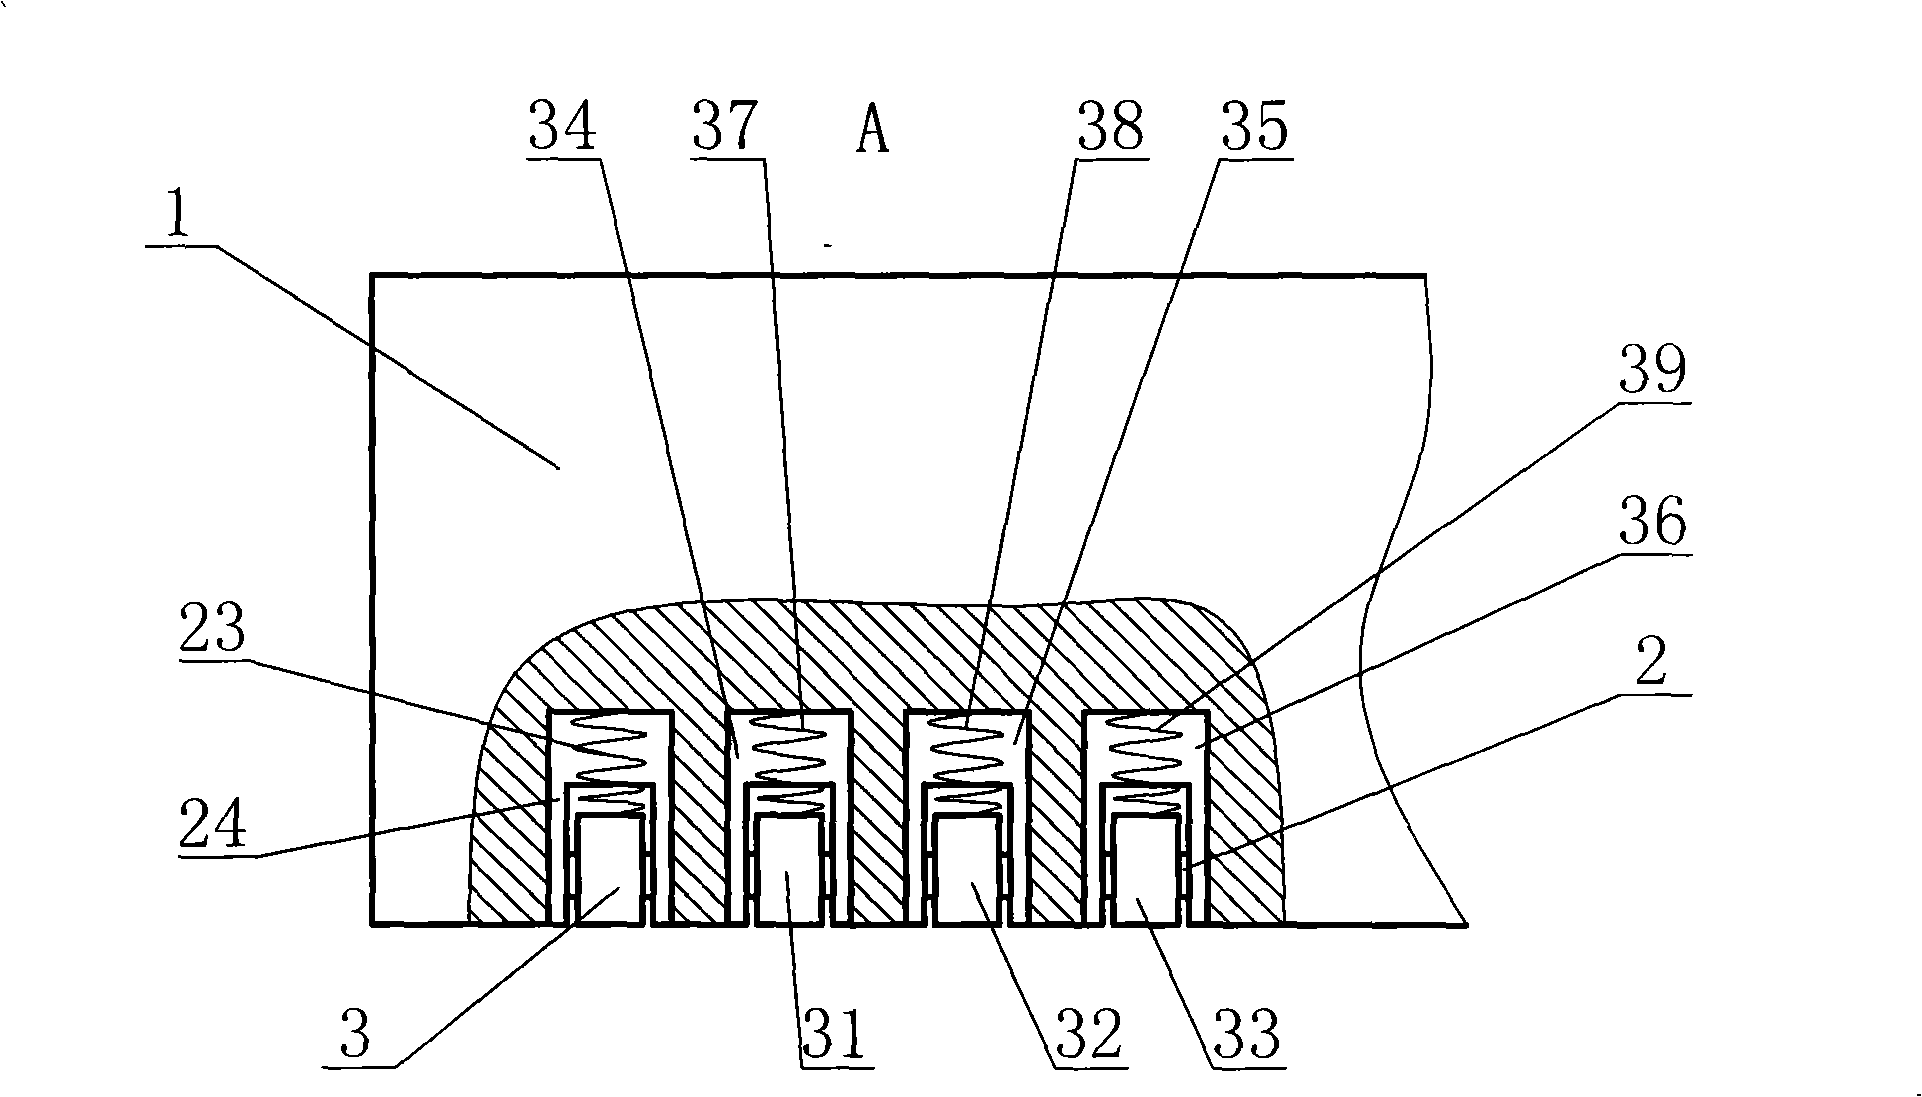 Numbering device